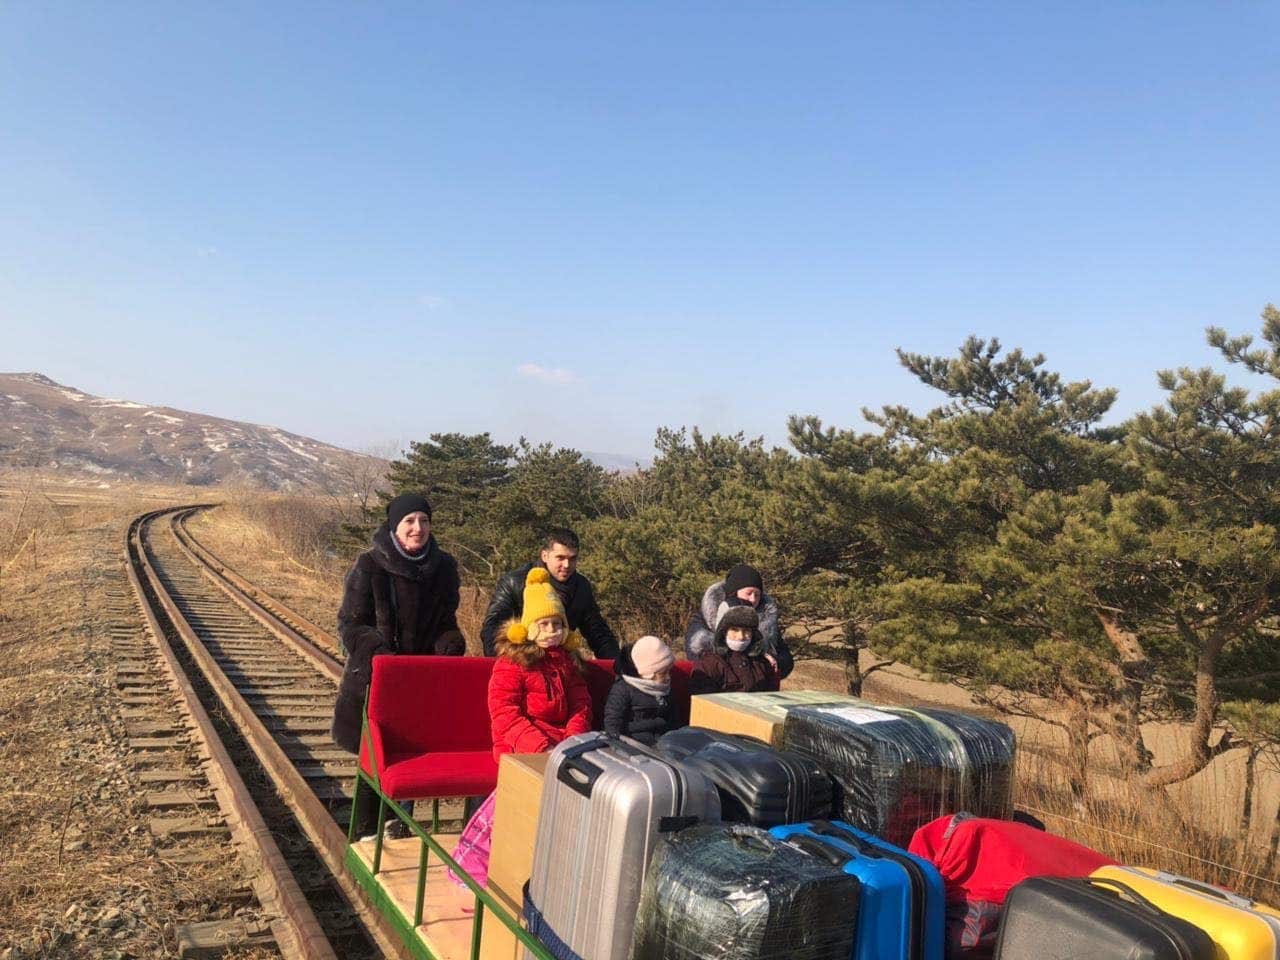 Russian diplomats leave North Korea in a cart pushed by hand